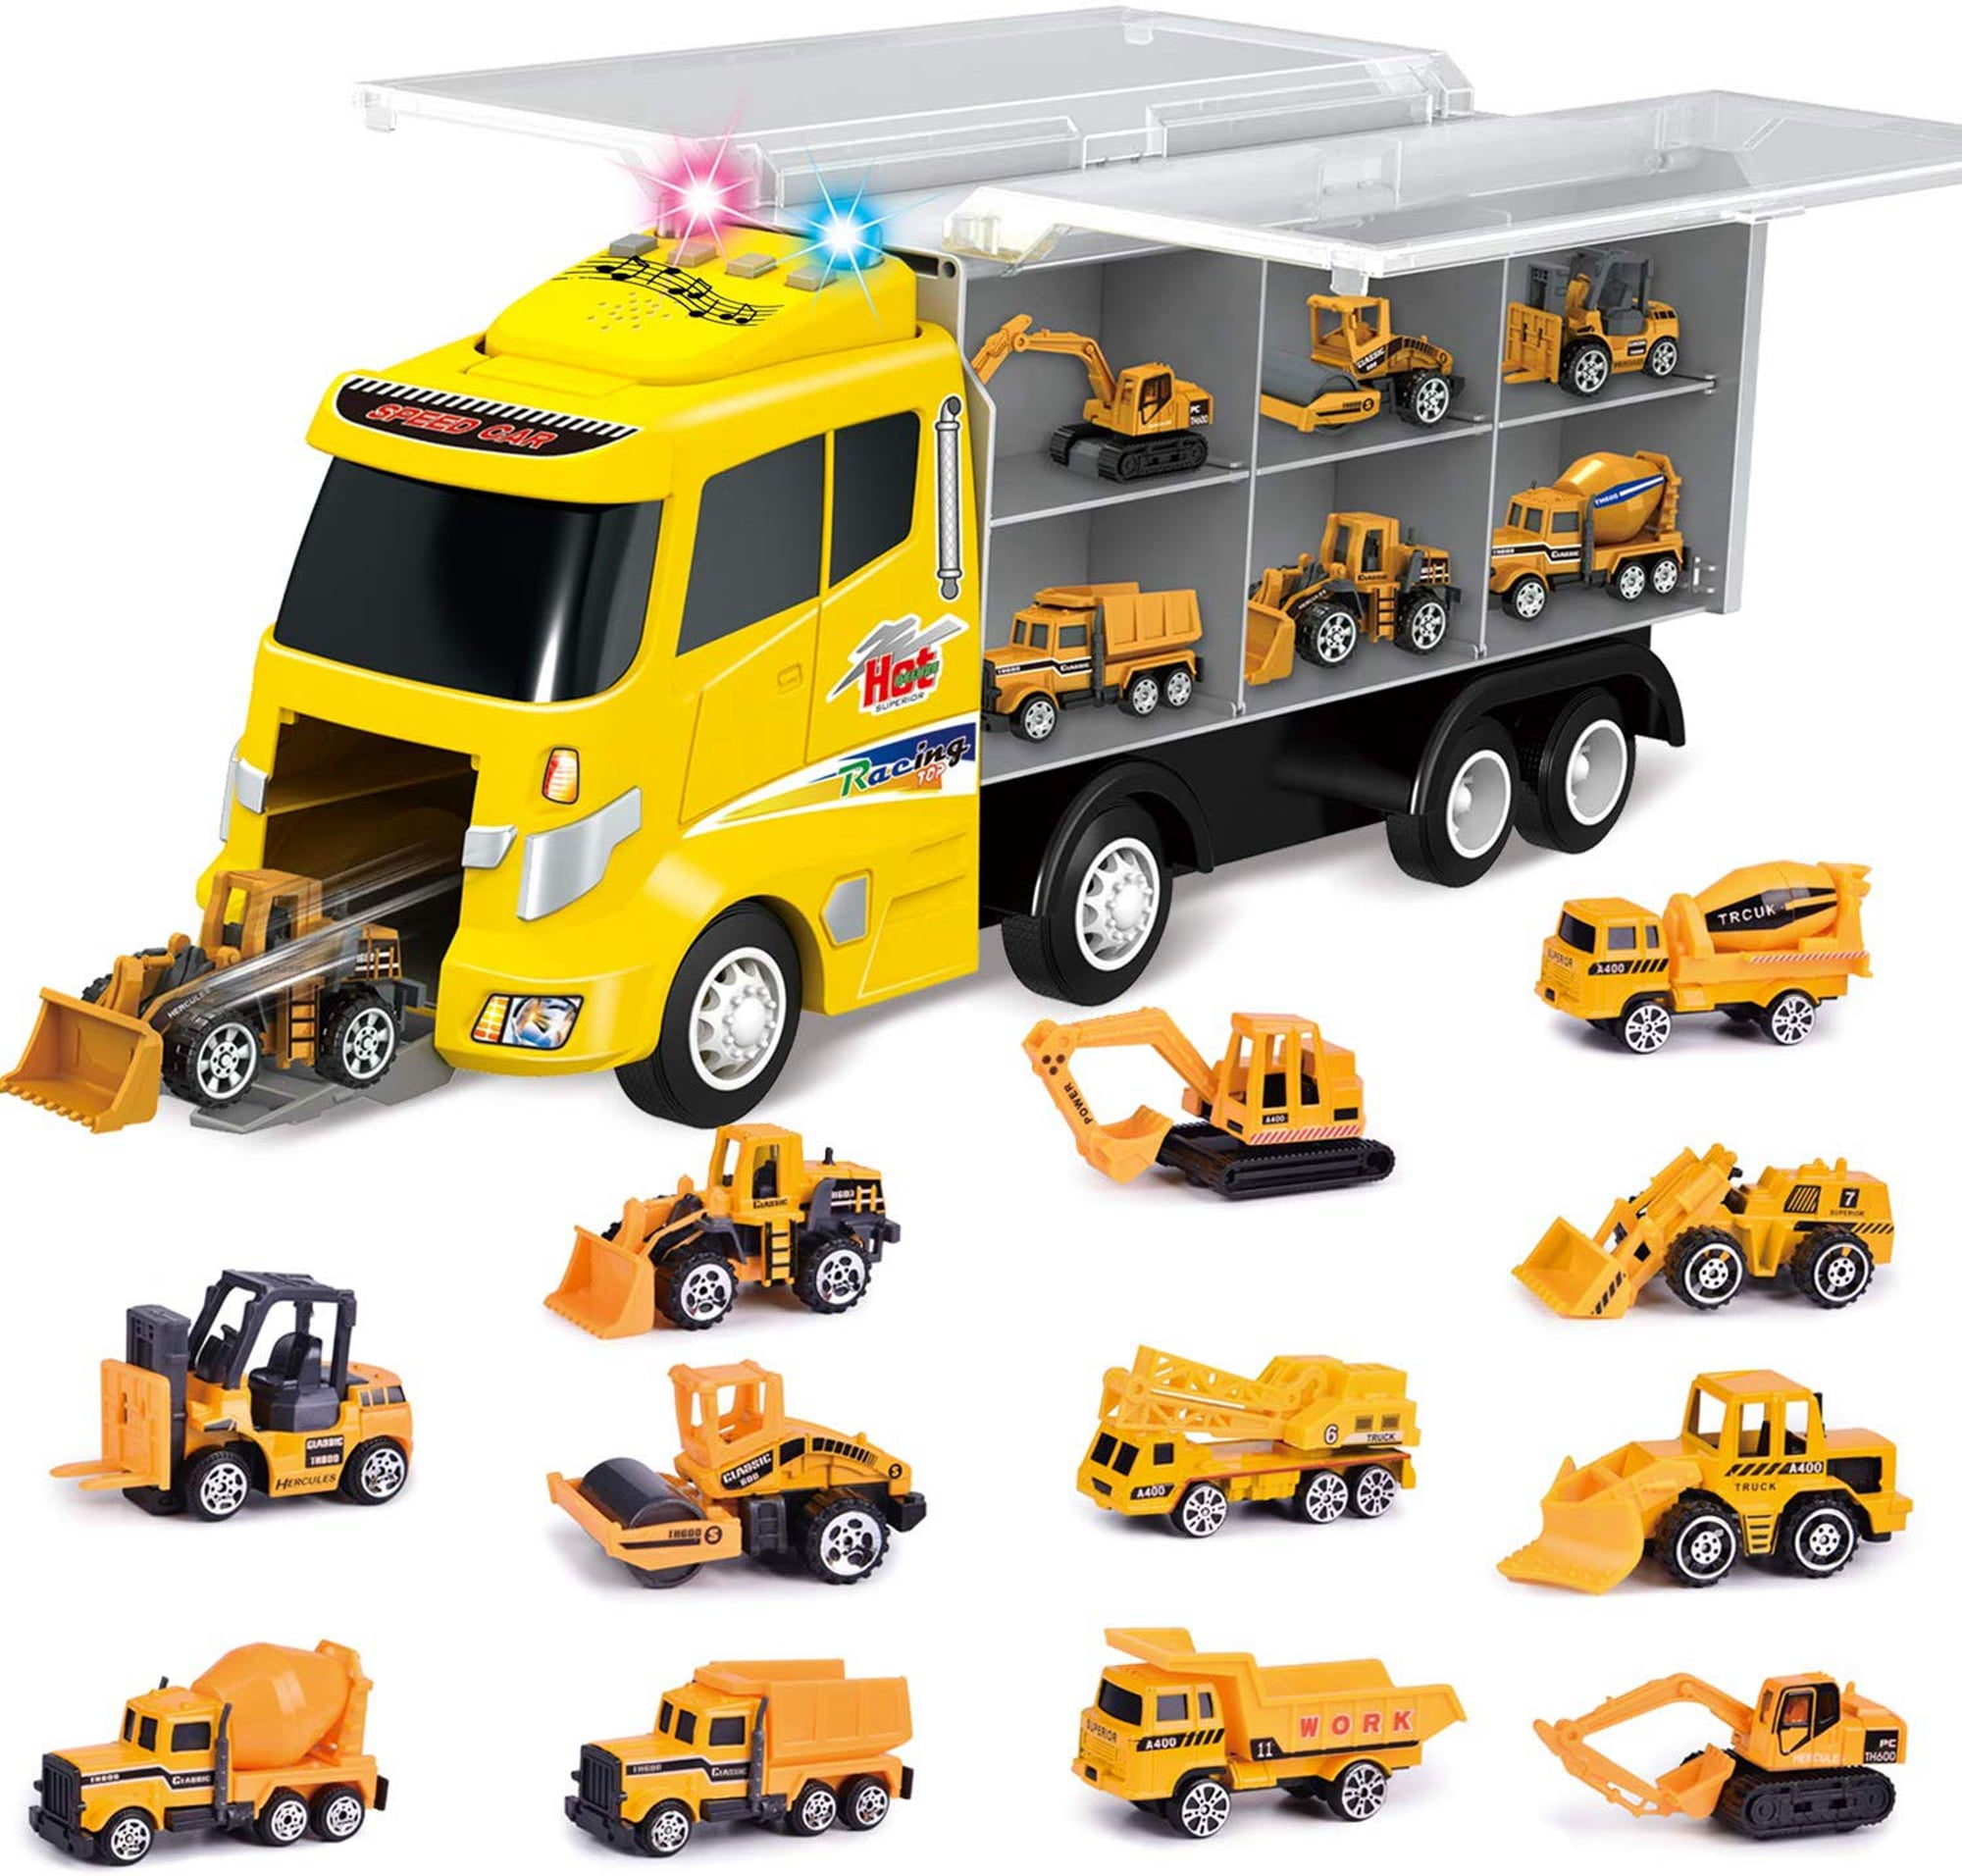 JOYIN 5 Pcs Construction Transport Car Toy Playset with 1 Carrier Truck and 4 Construction Cars Educational Toy Vehicle for Kids Boys Girls Birthday Gift